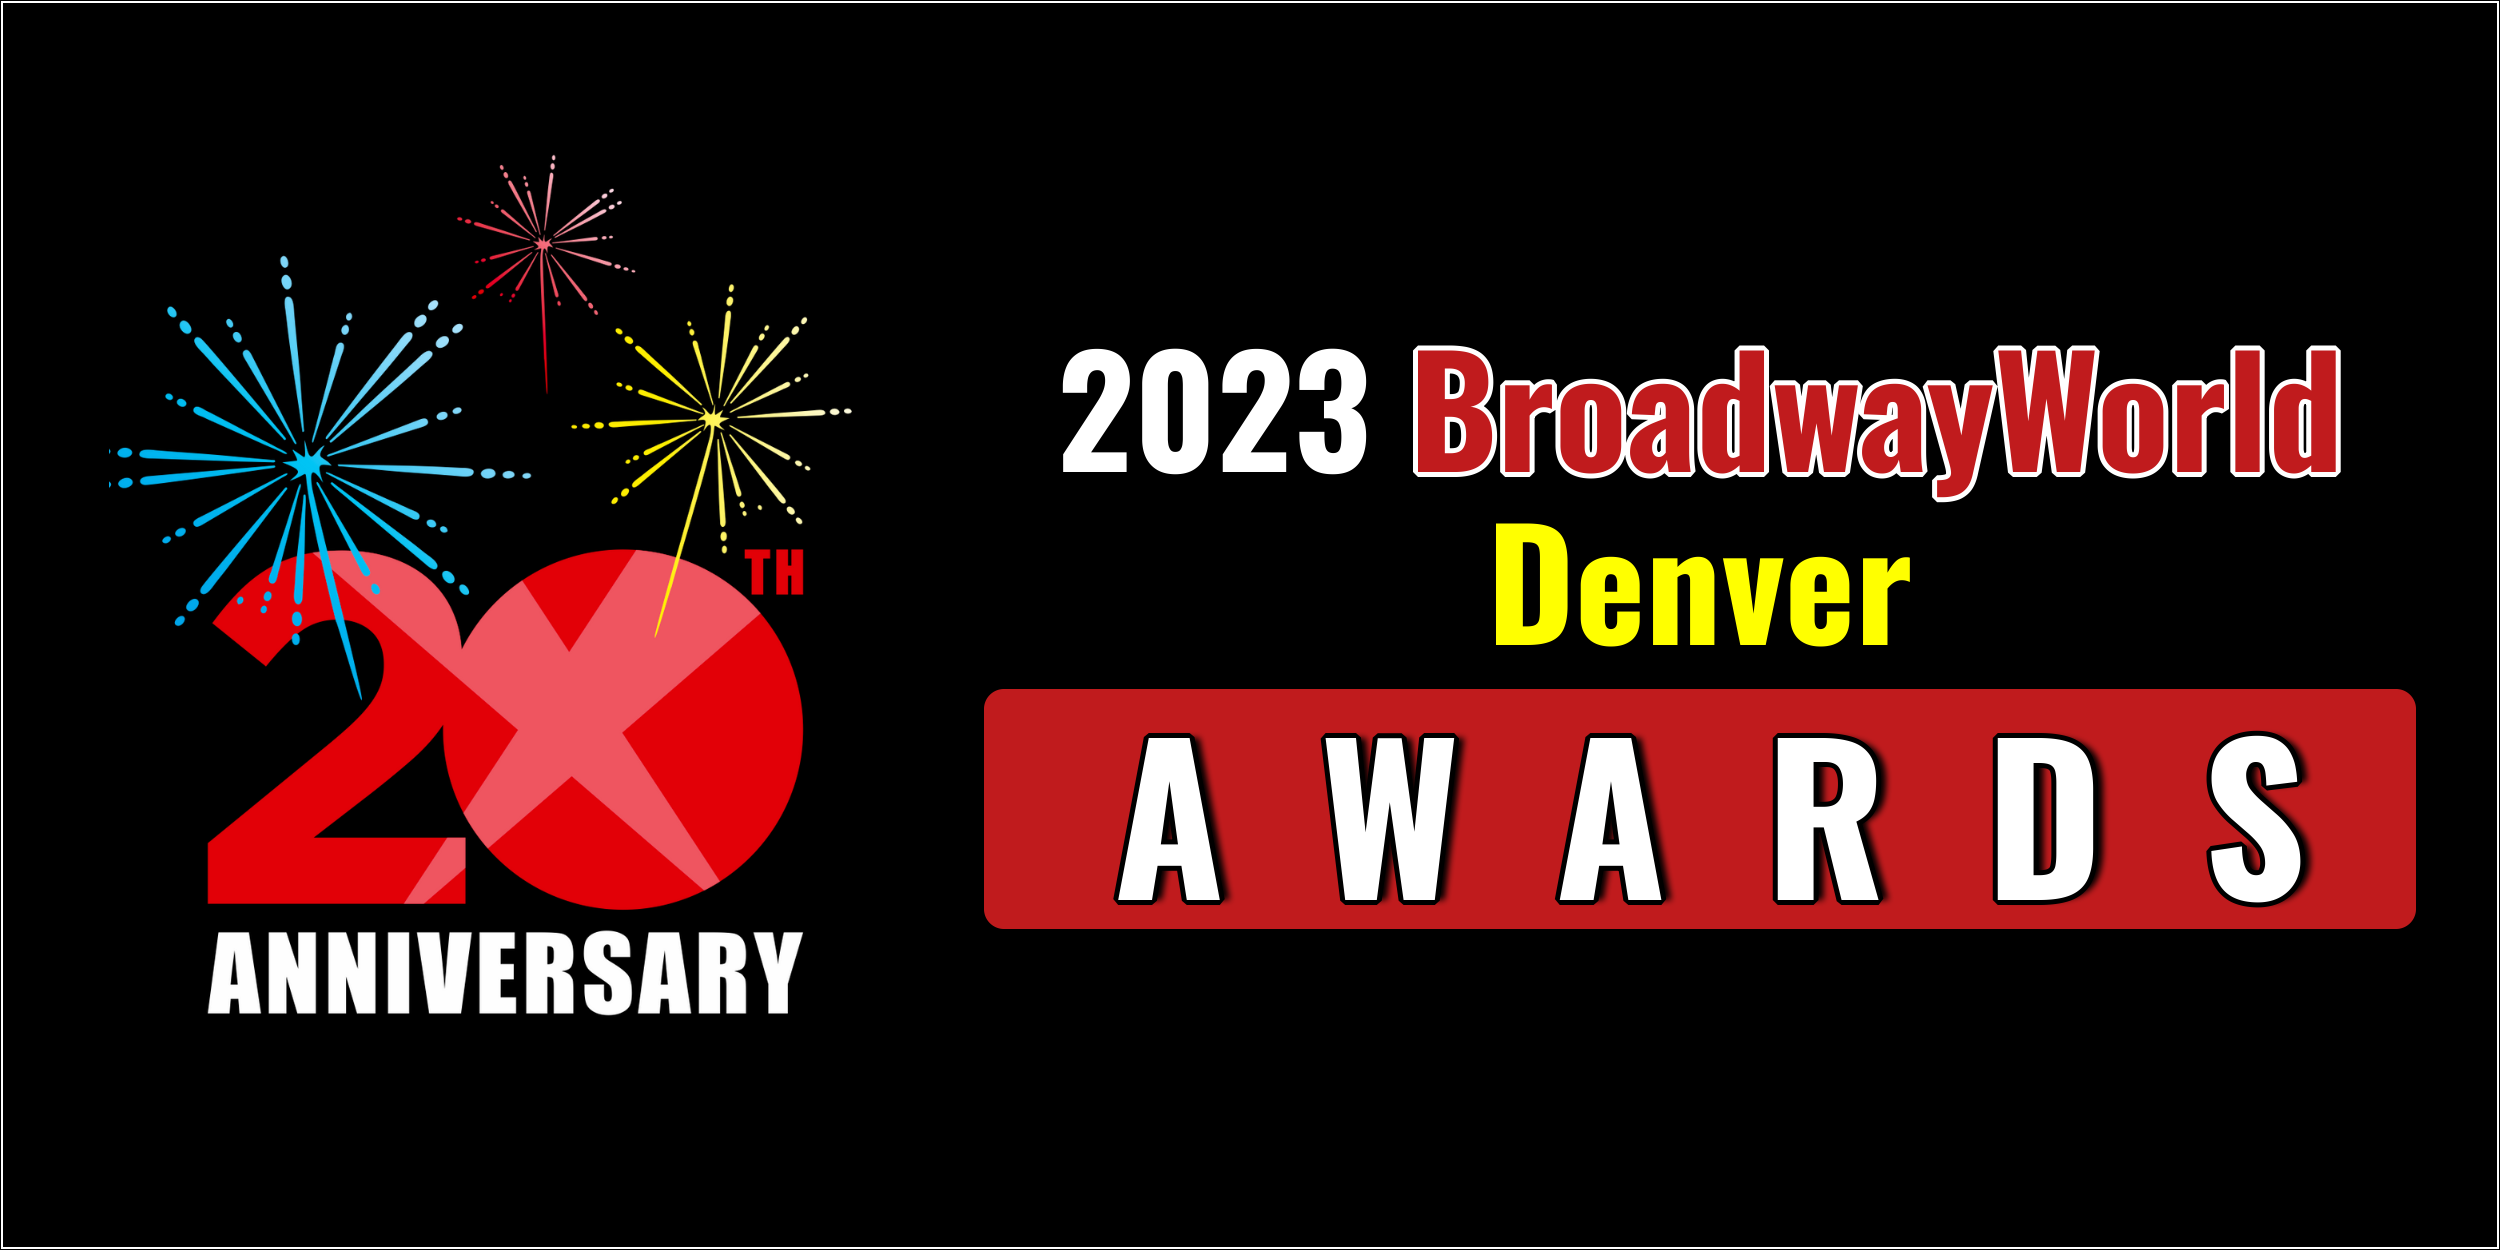 Latest Standings Announced For The 2023 BroadwayWorld Denver Awards; HEDWIG AND THE ANGRY  Photo